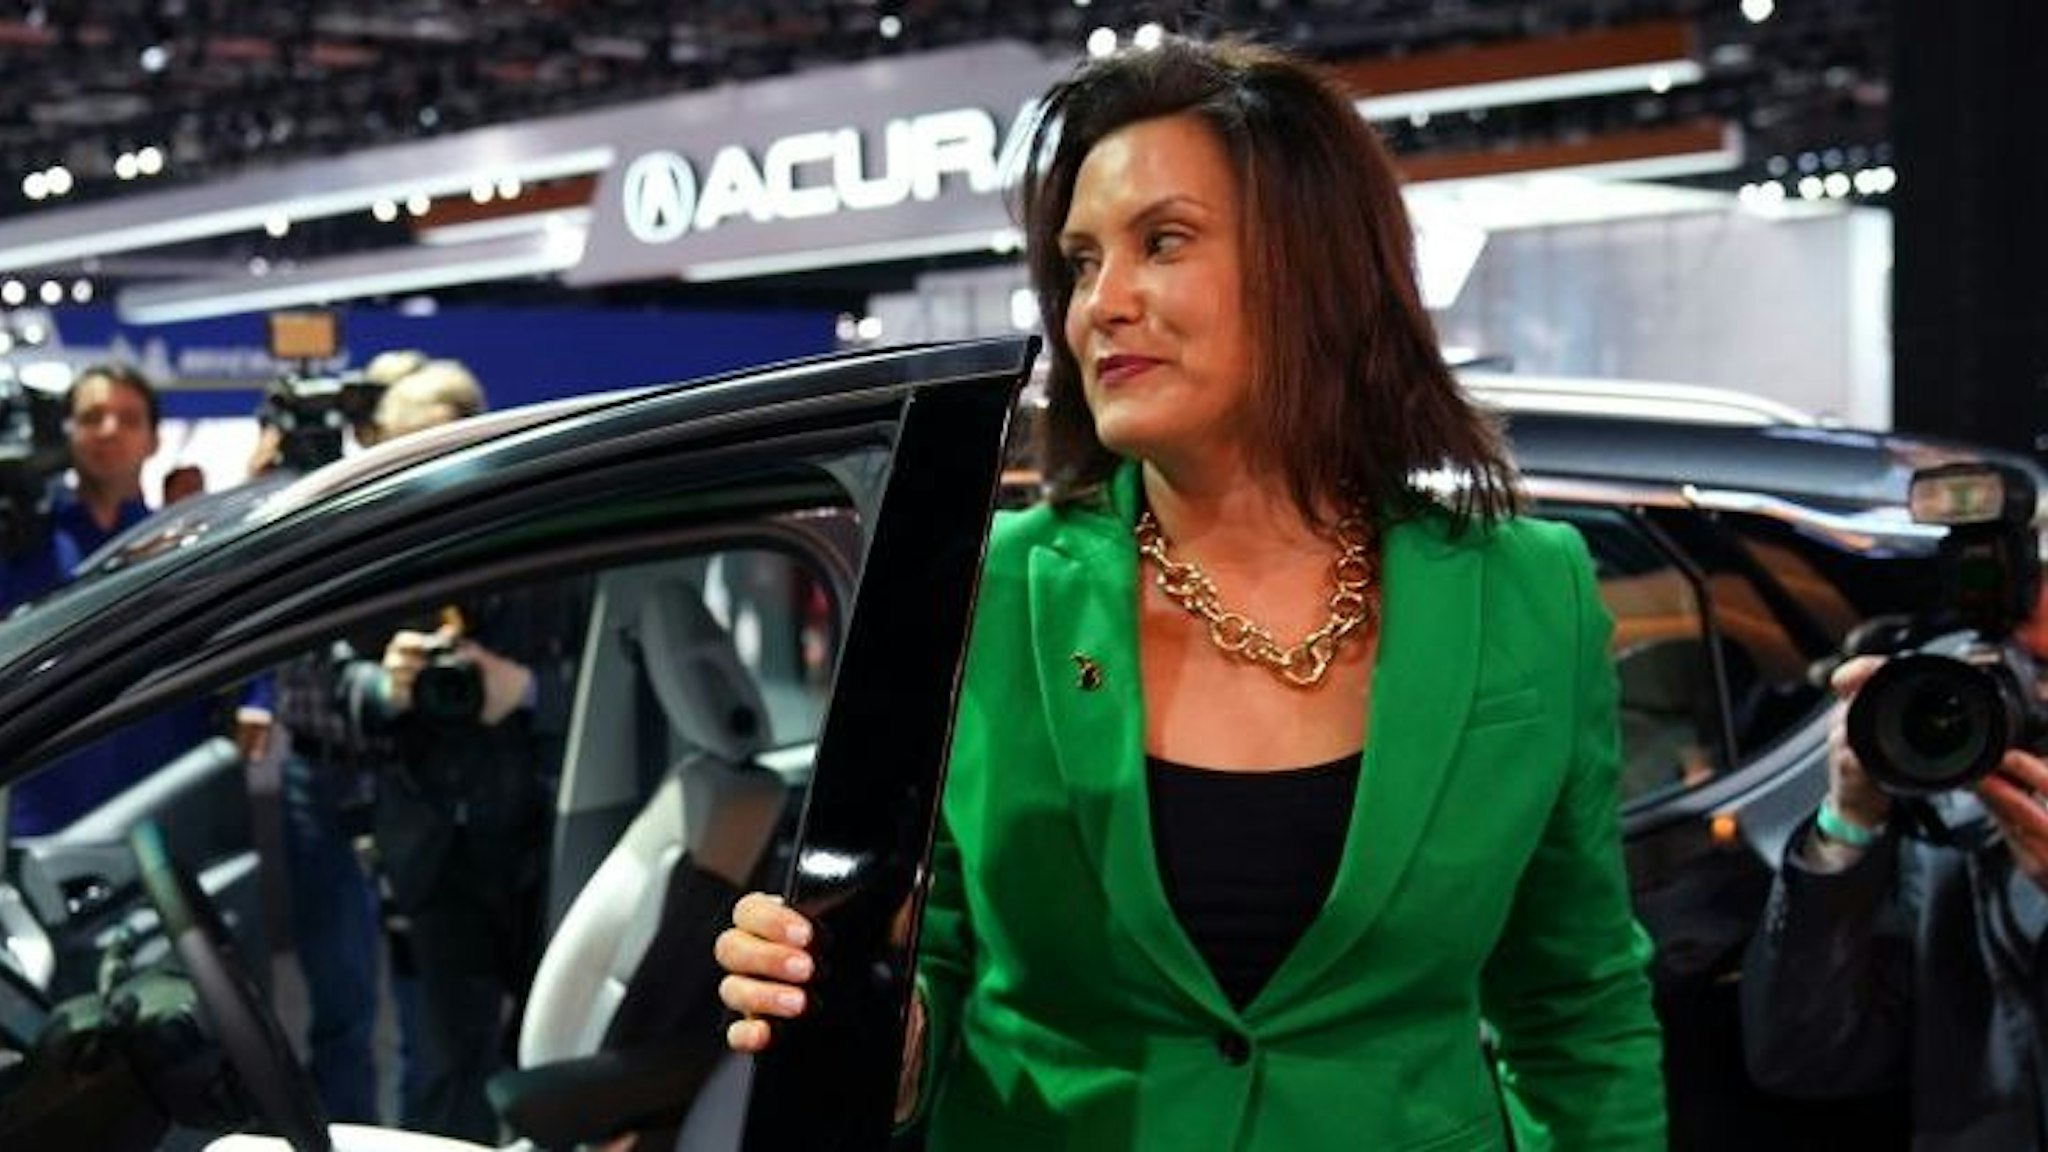 Gretchen Whitmer, newley elected governor of Michigan tours the show during day two of the 2019 The North American International Auto Show January 15, 2019 at the Cobo Center in Detroit, Michigan. (Photo by TIMOTHY A. CLARY / AFP)